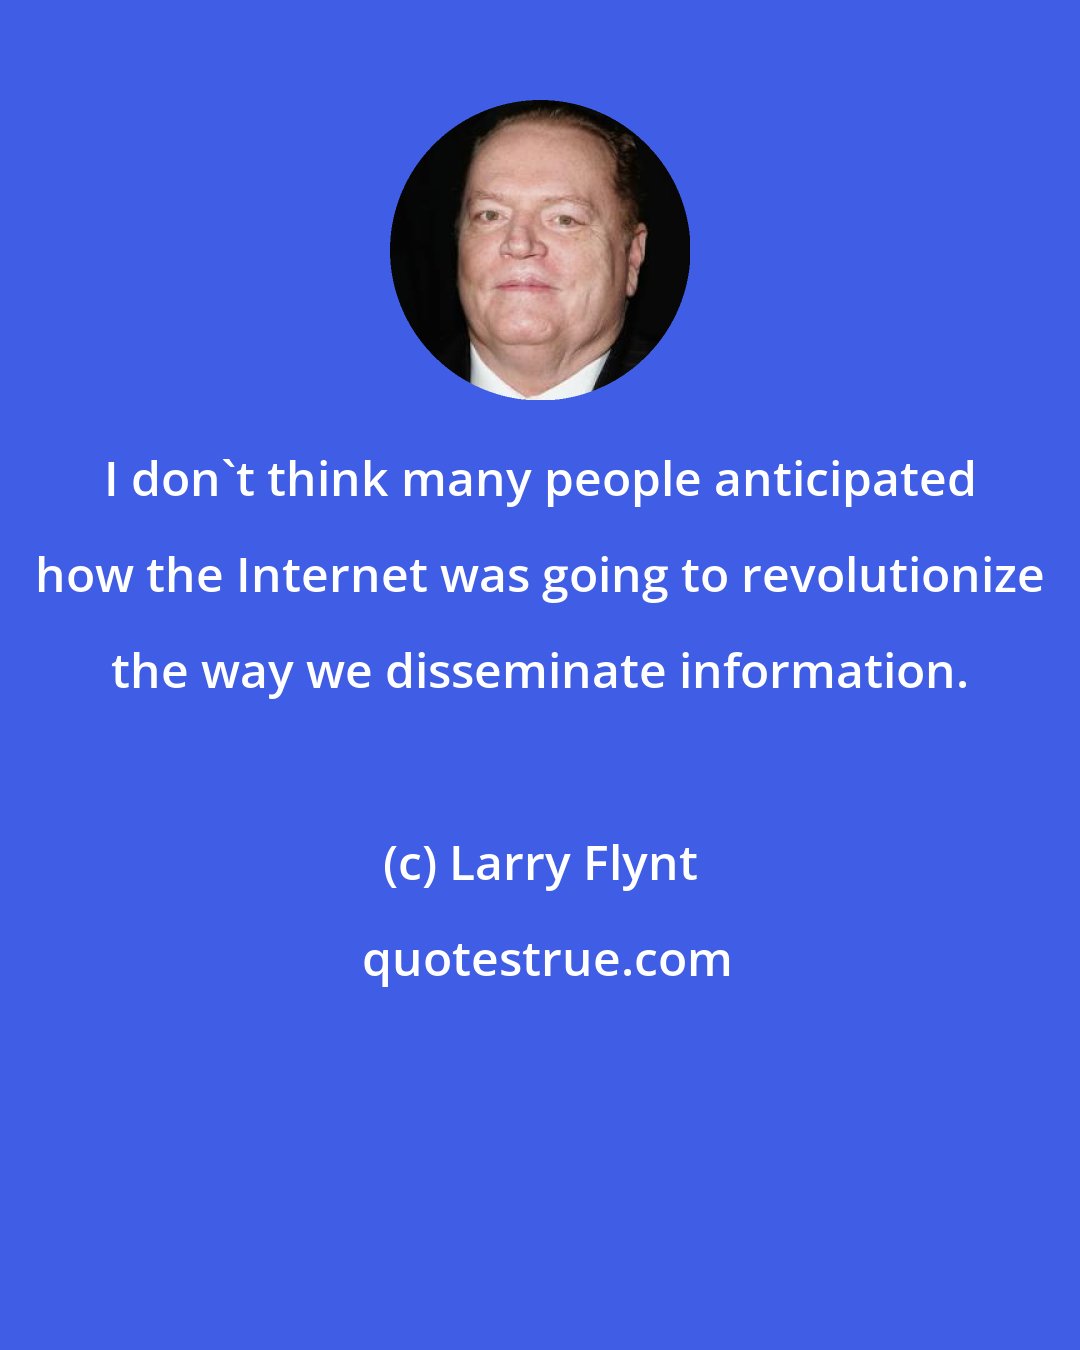 Larry Flynt: I don't think many people anticipated how the Internet was going to revolutionize the way we disseminate information.